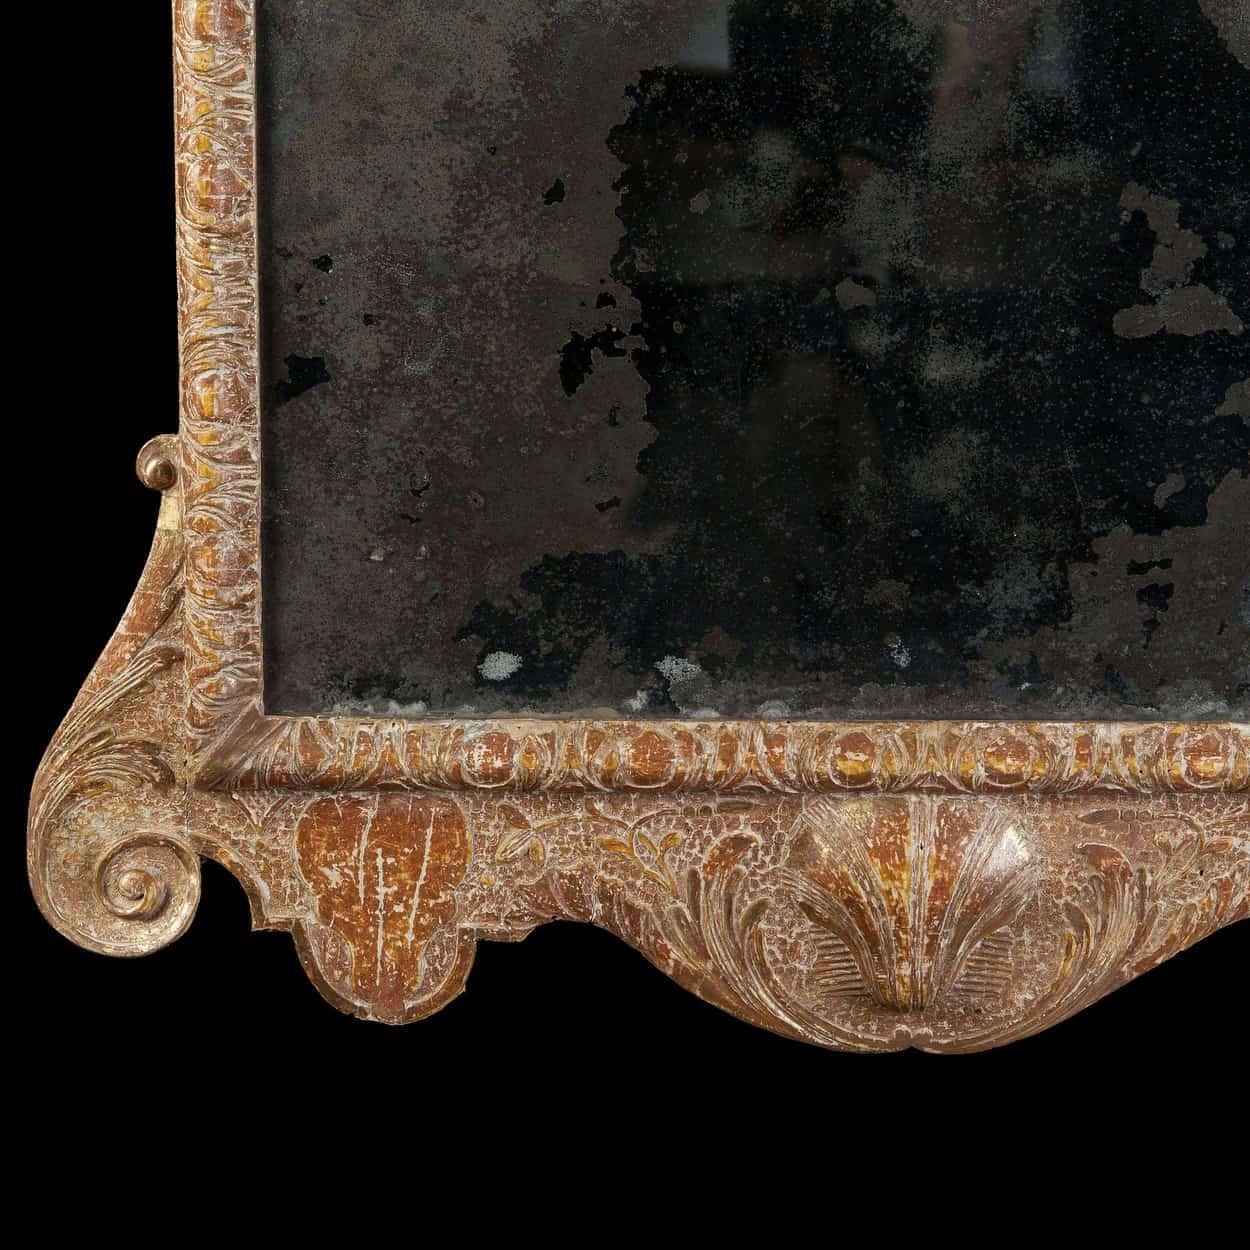 A rare Queen Anne gilt gesso pier mirror, retaining its original beveled mirror plate and gilding. The cresting bears the unusual feature of a carved bust in high relief below three feathers. In the manner of John Belchier.
England, circa